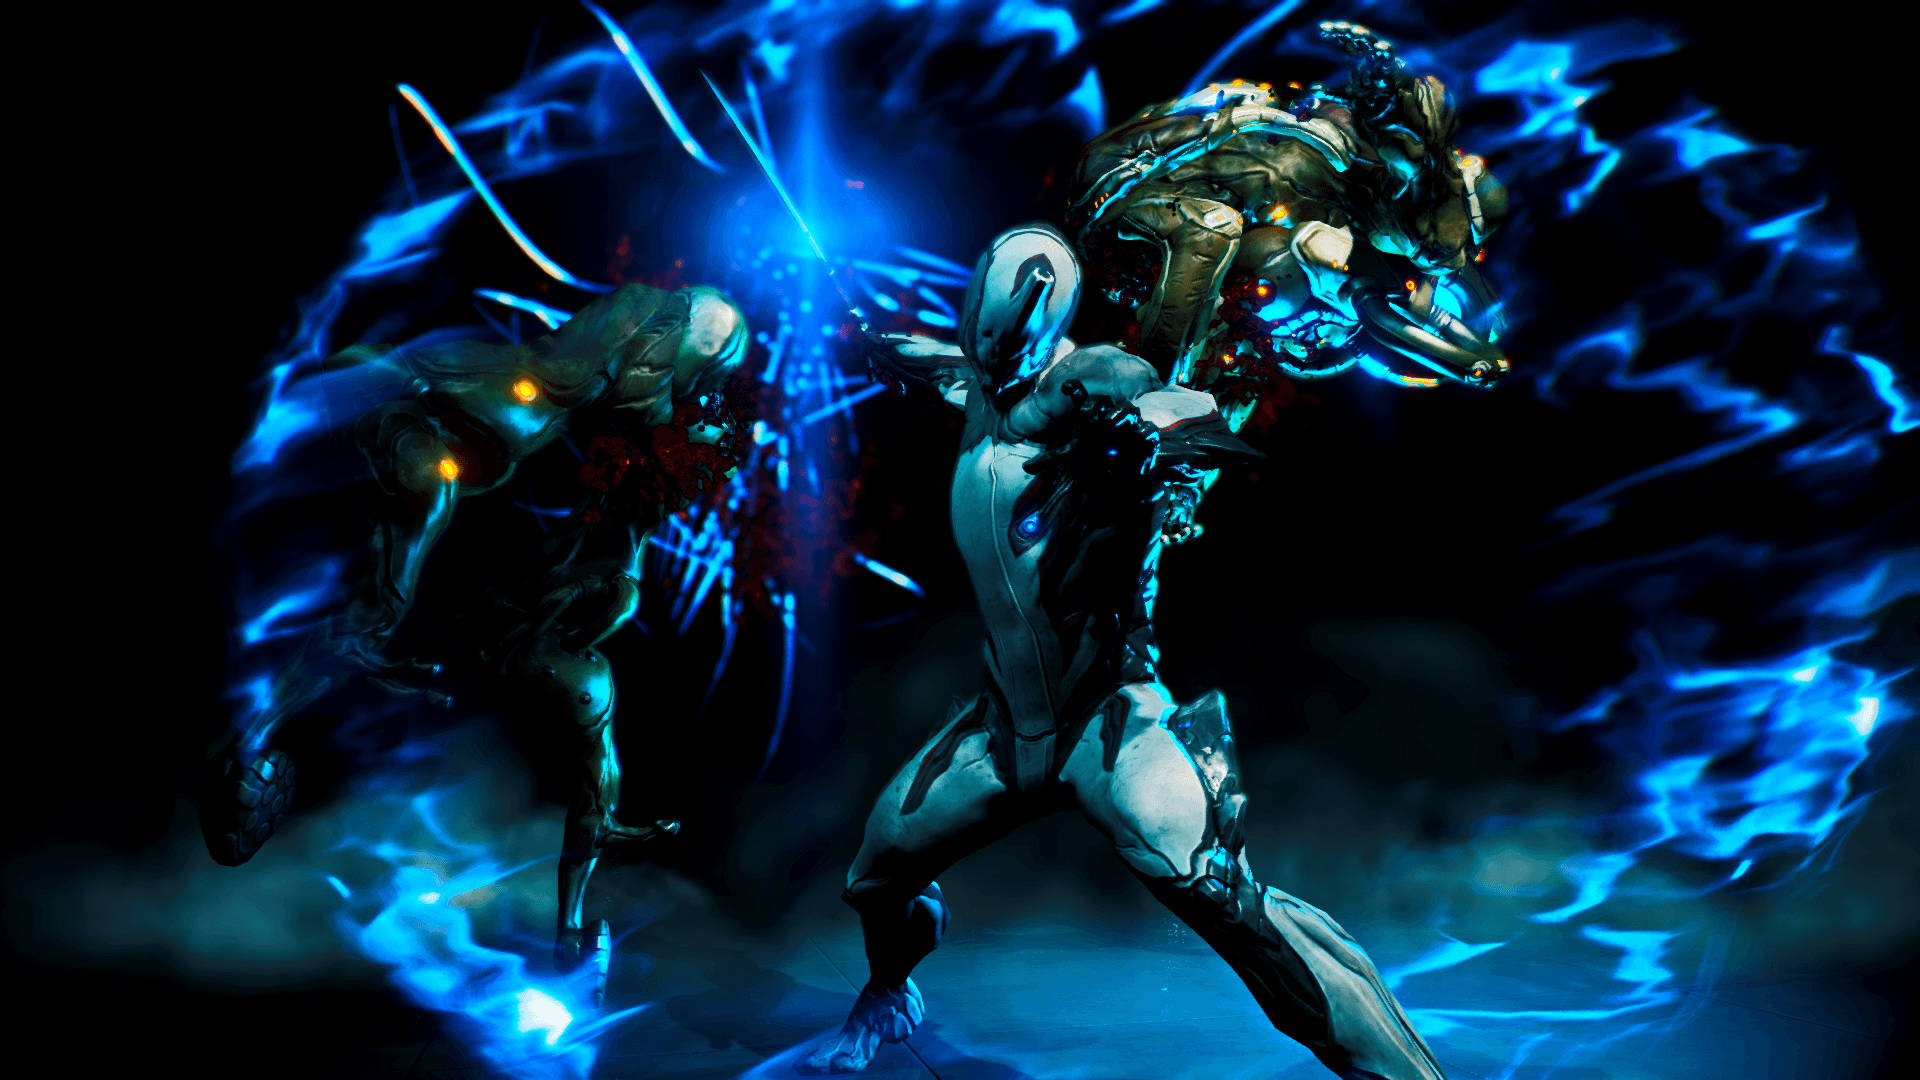 Warframe single Tenno ancient warrior attacking with blue fire-emitting sword wallpaper.